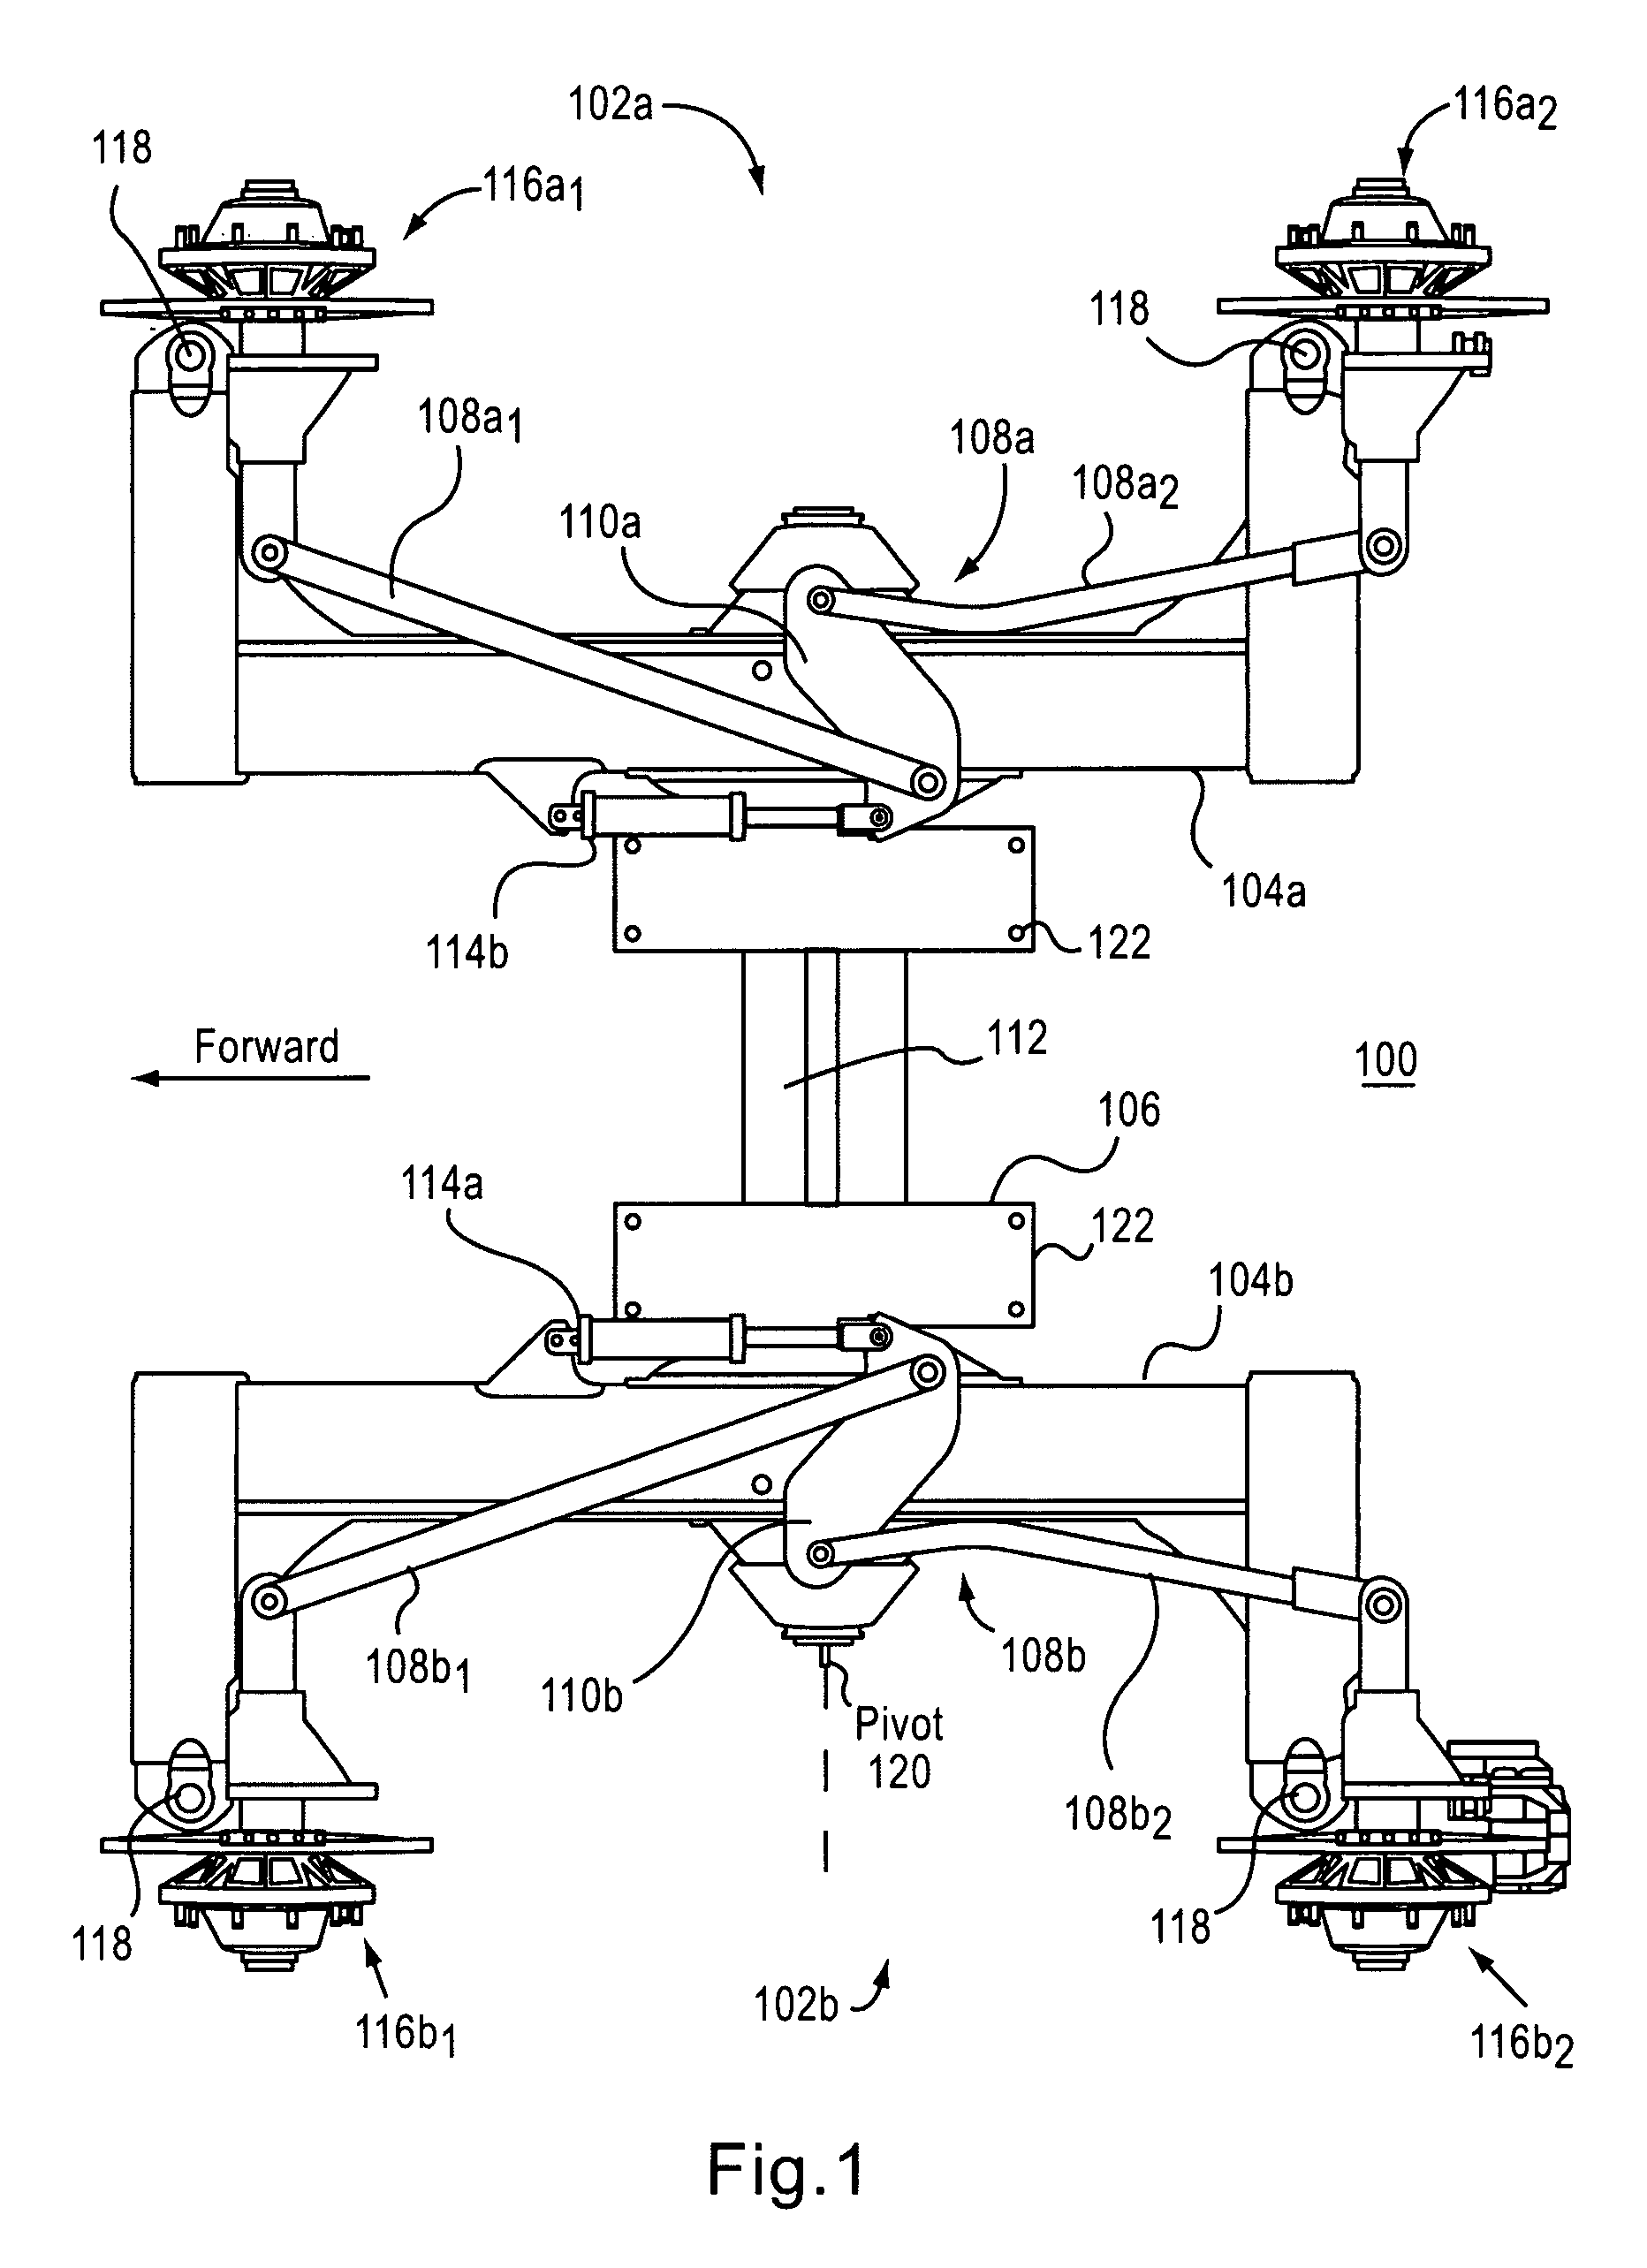 Oscillating steering system for an agricultural implement